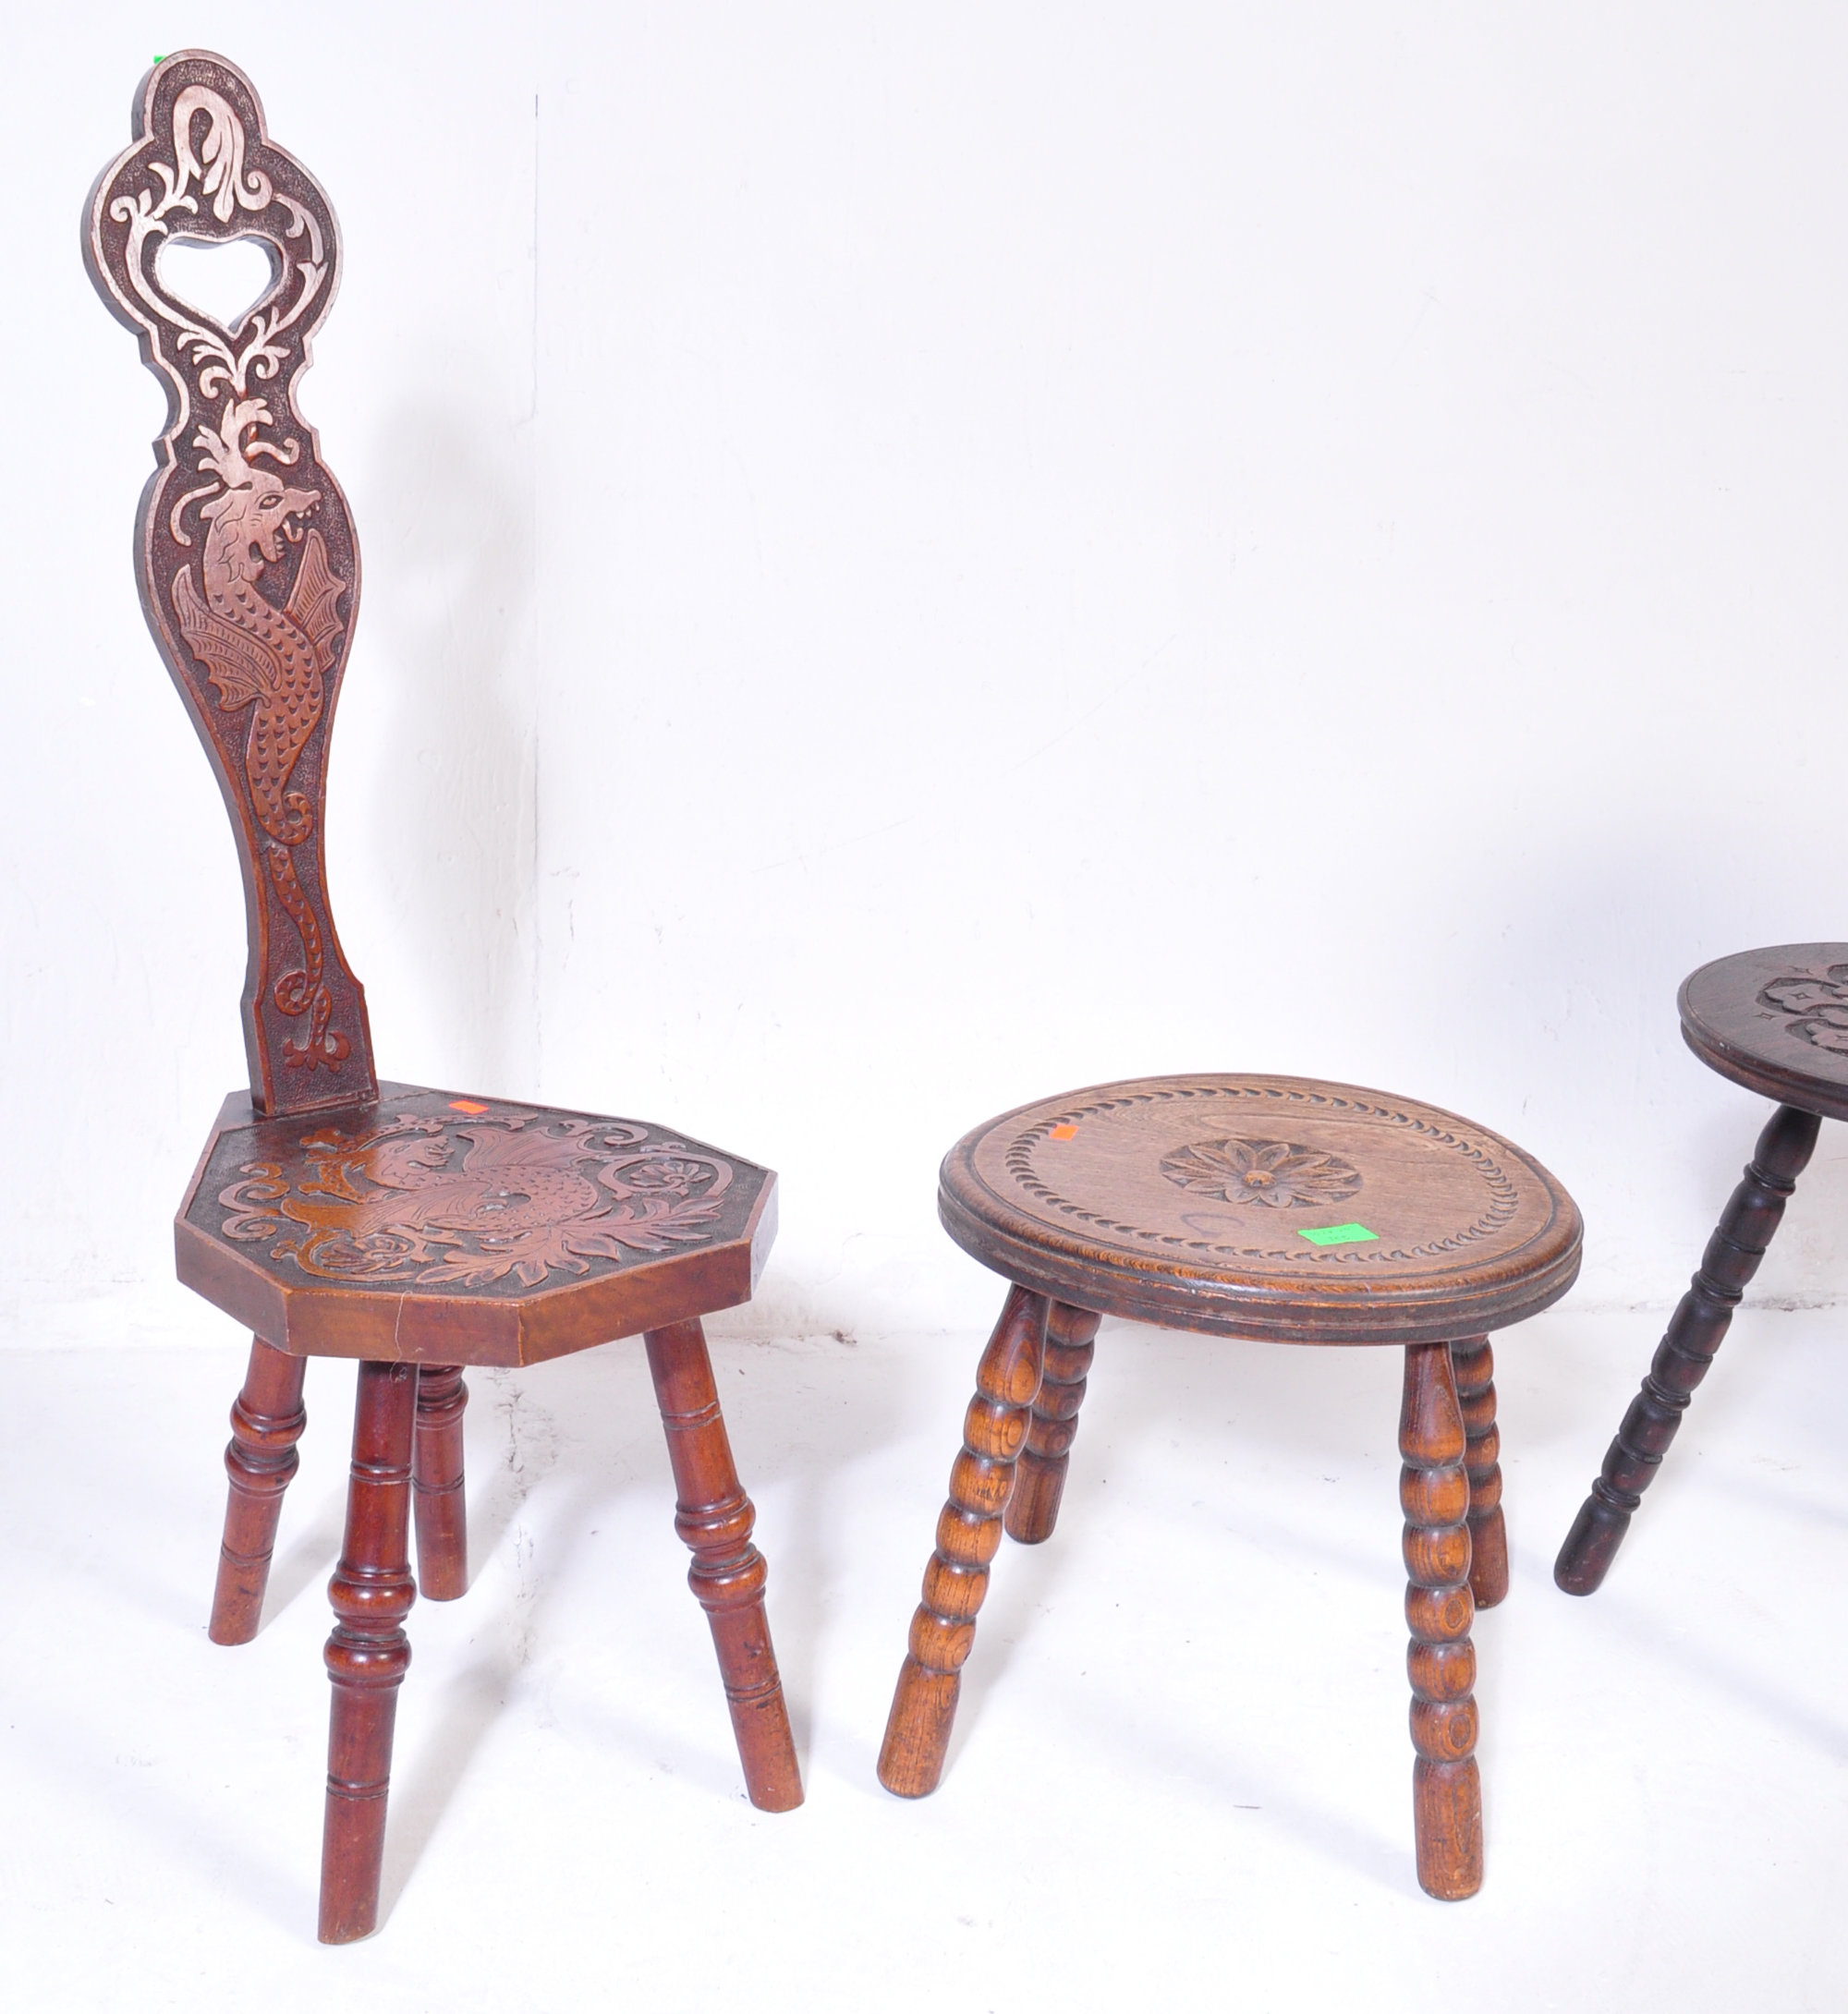 EARLY 20TH CENTURY OAK FURNITURE - STOOLS - SPINNING CHAIR - Image 3 of 6